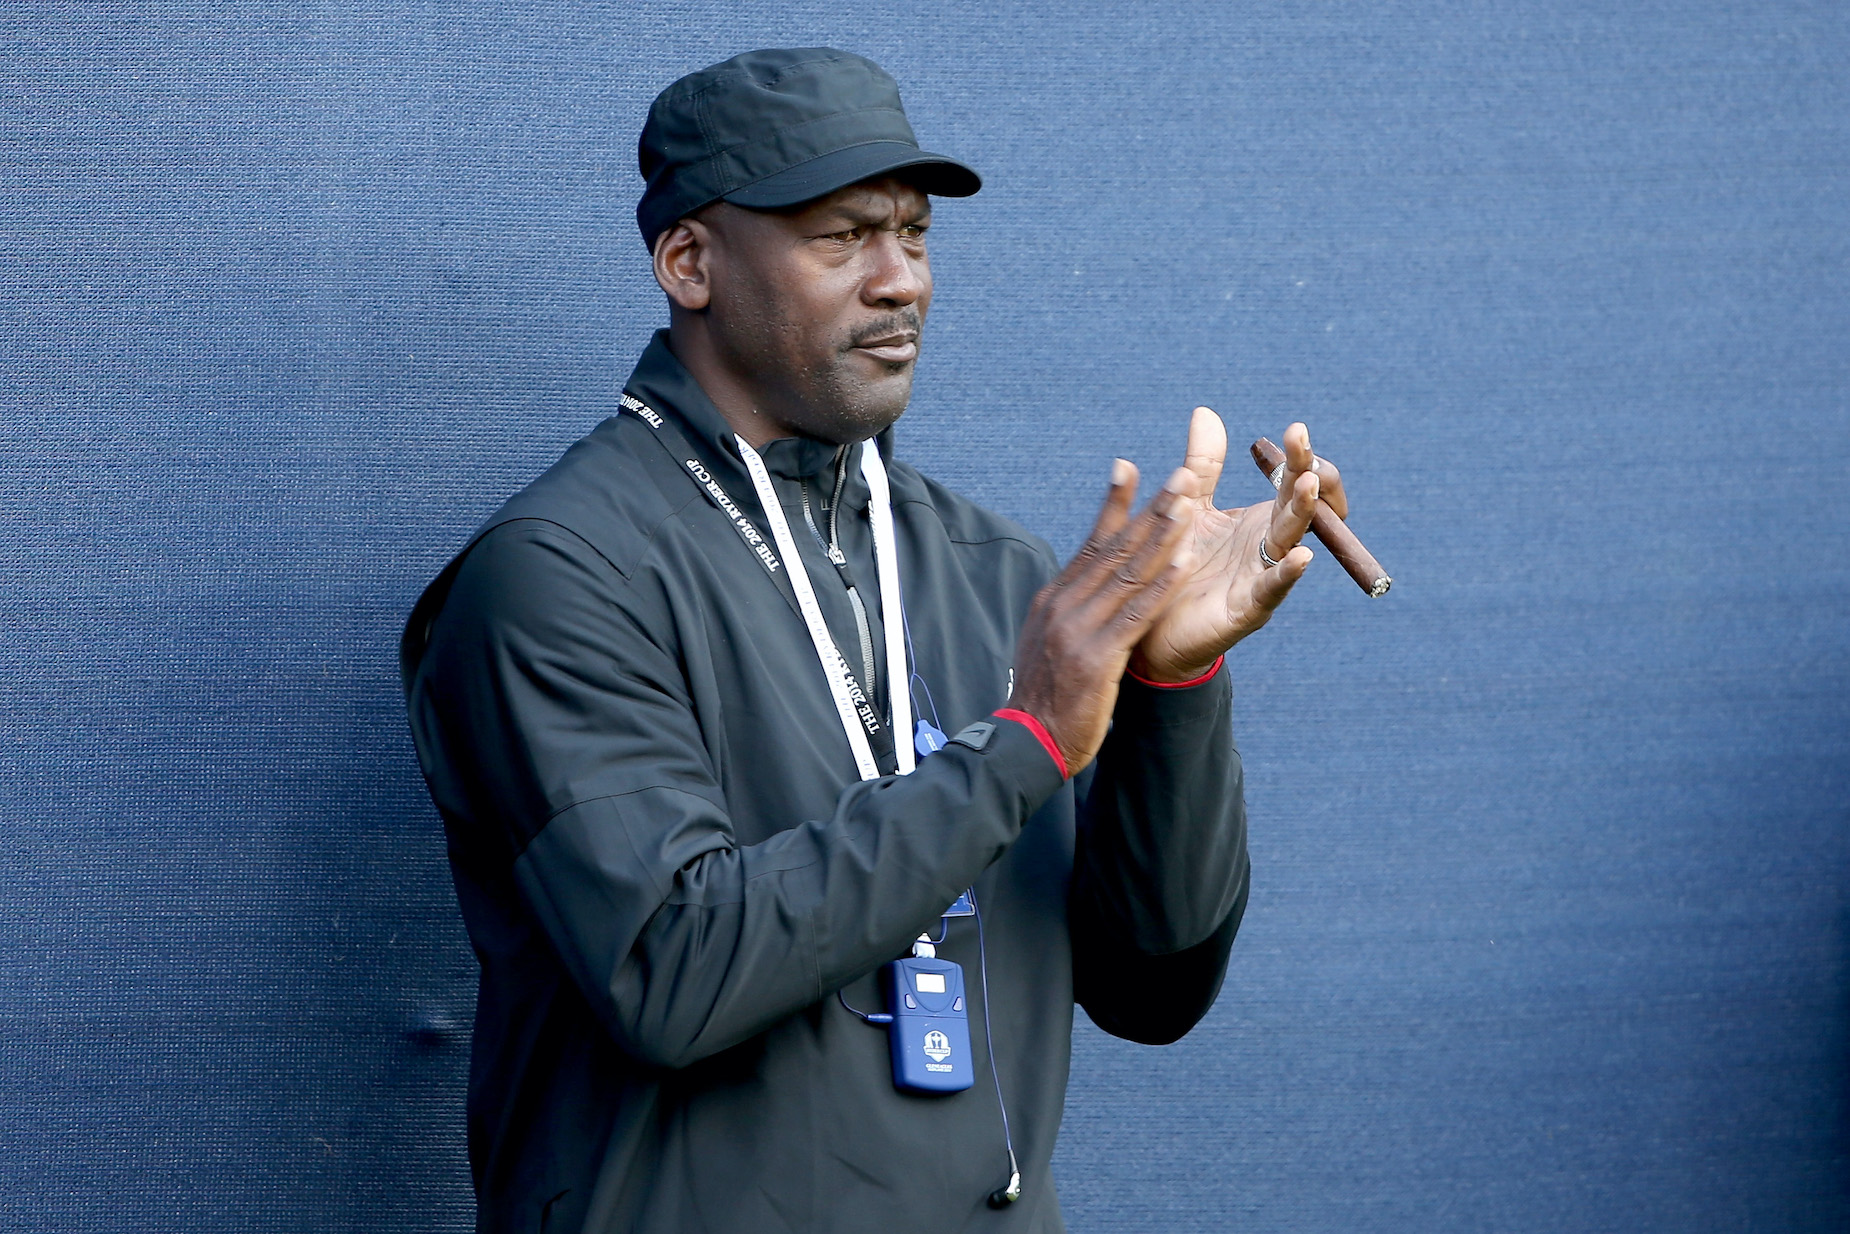 NBA legend Michael Jordan claps during the 2014 Ryder Cup in Scotland.